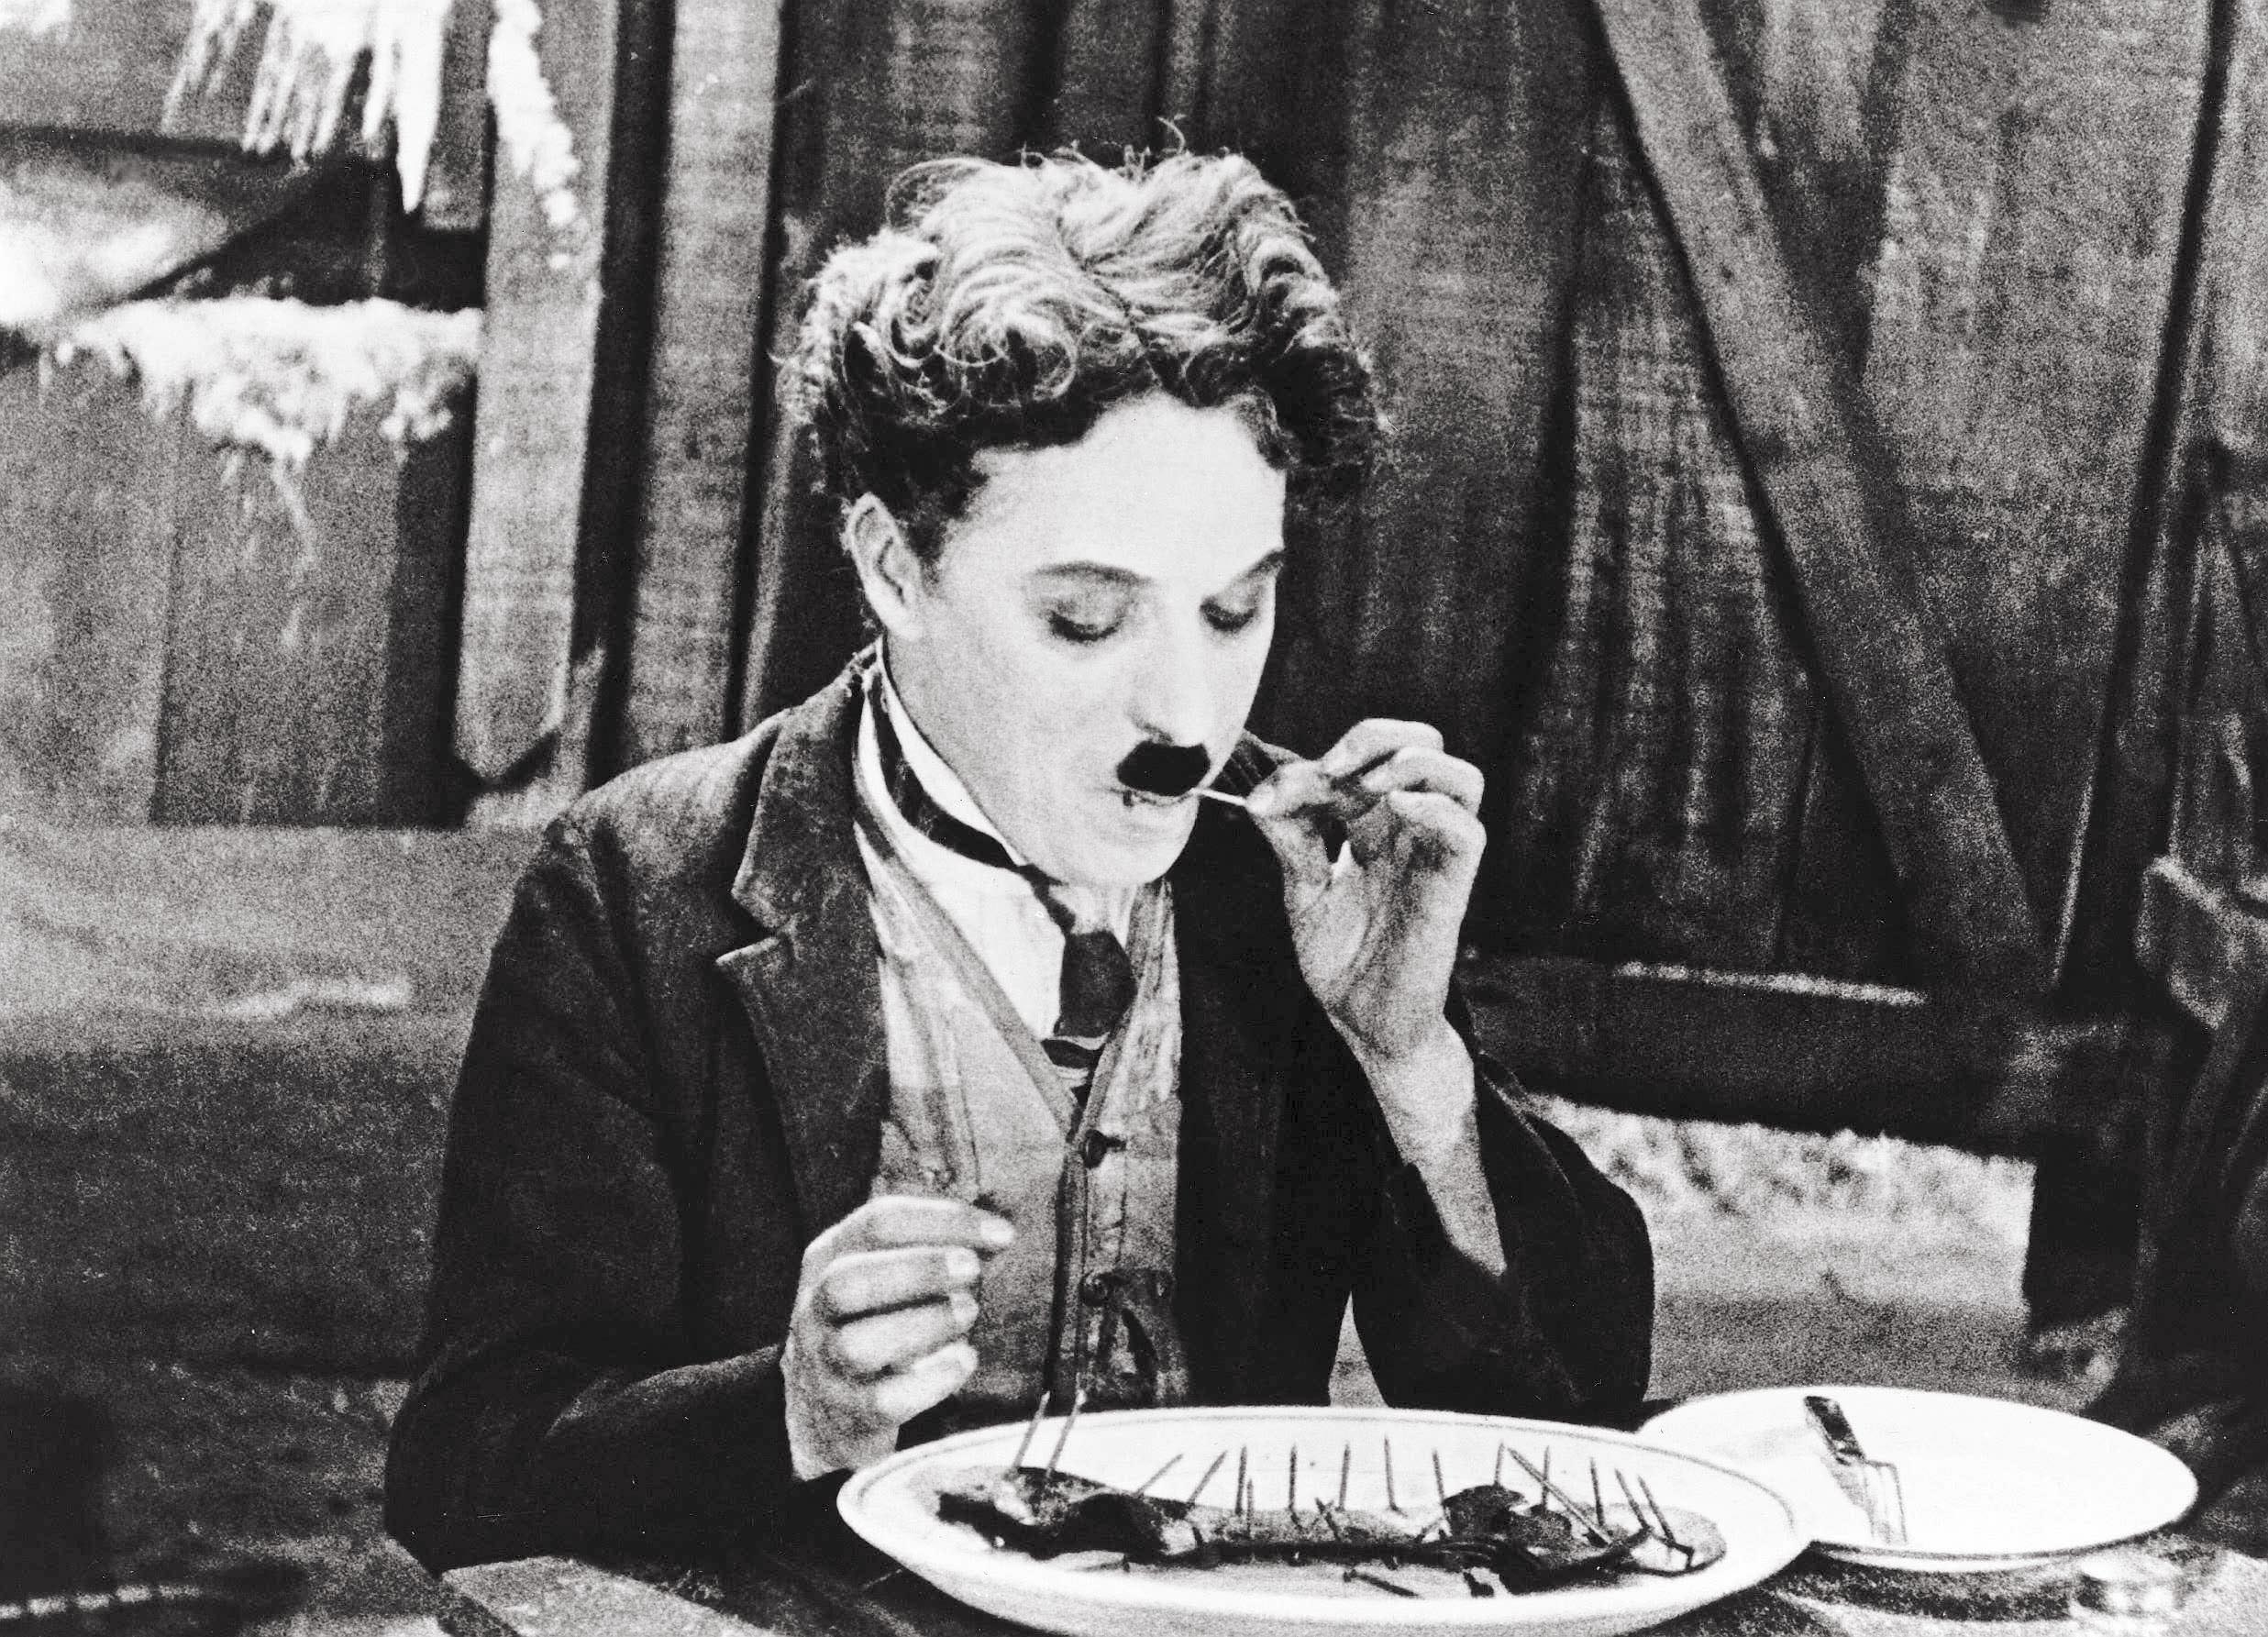 Charlie Chaplin in ‘The Gold Rush’ (1940)